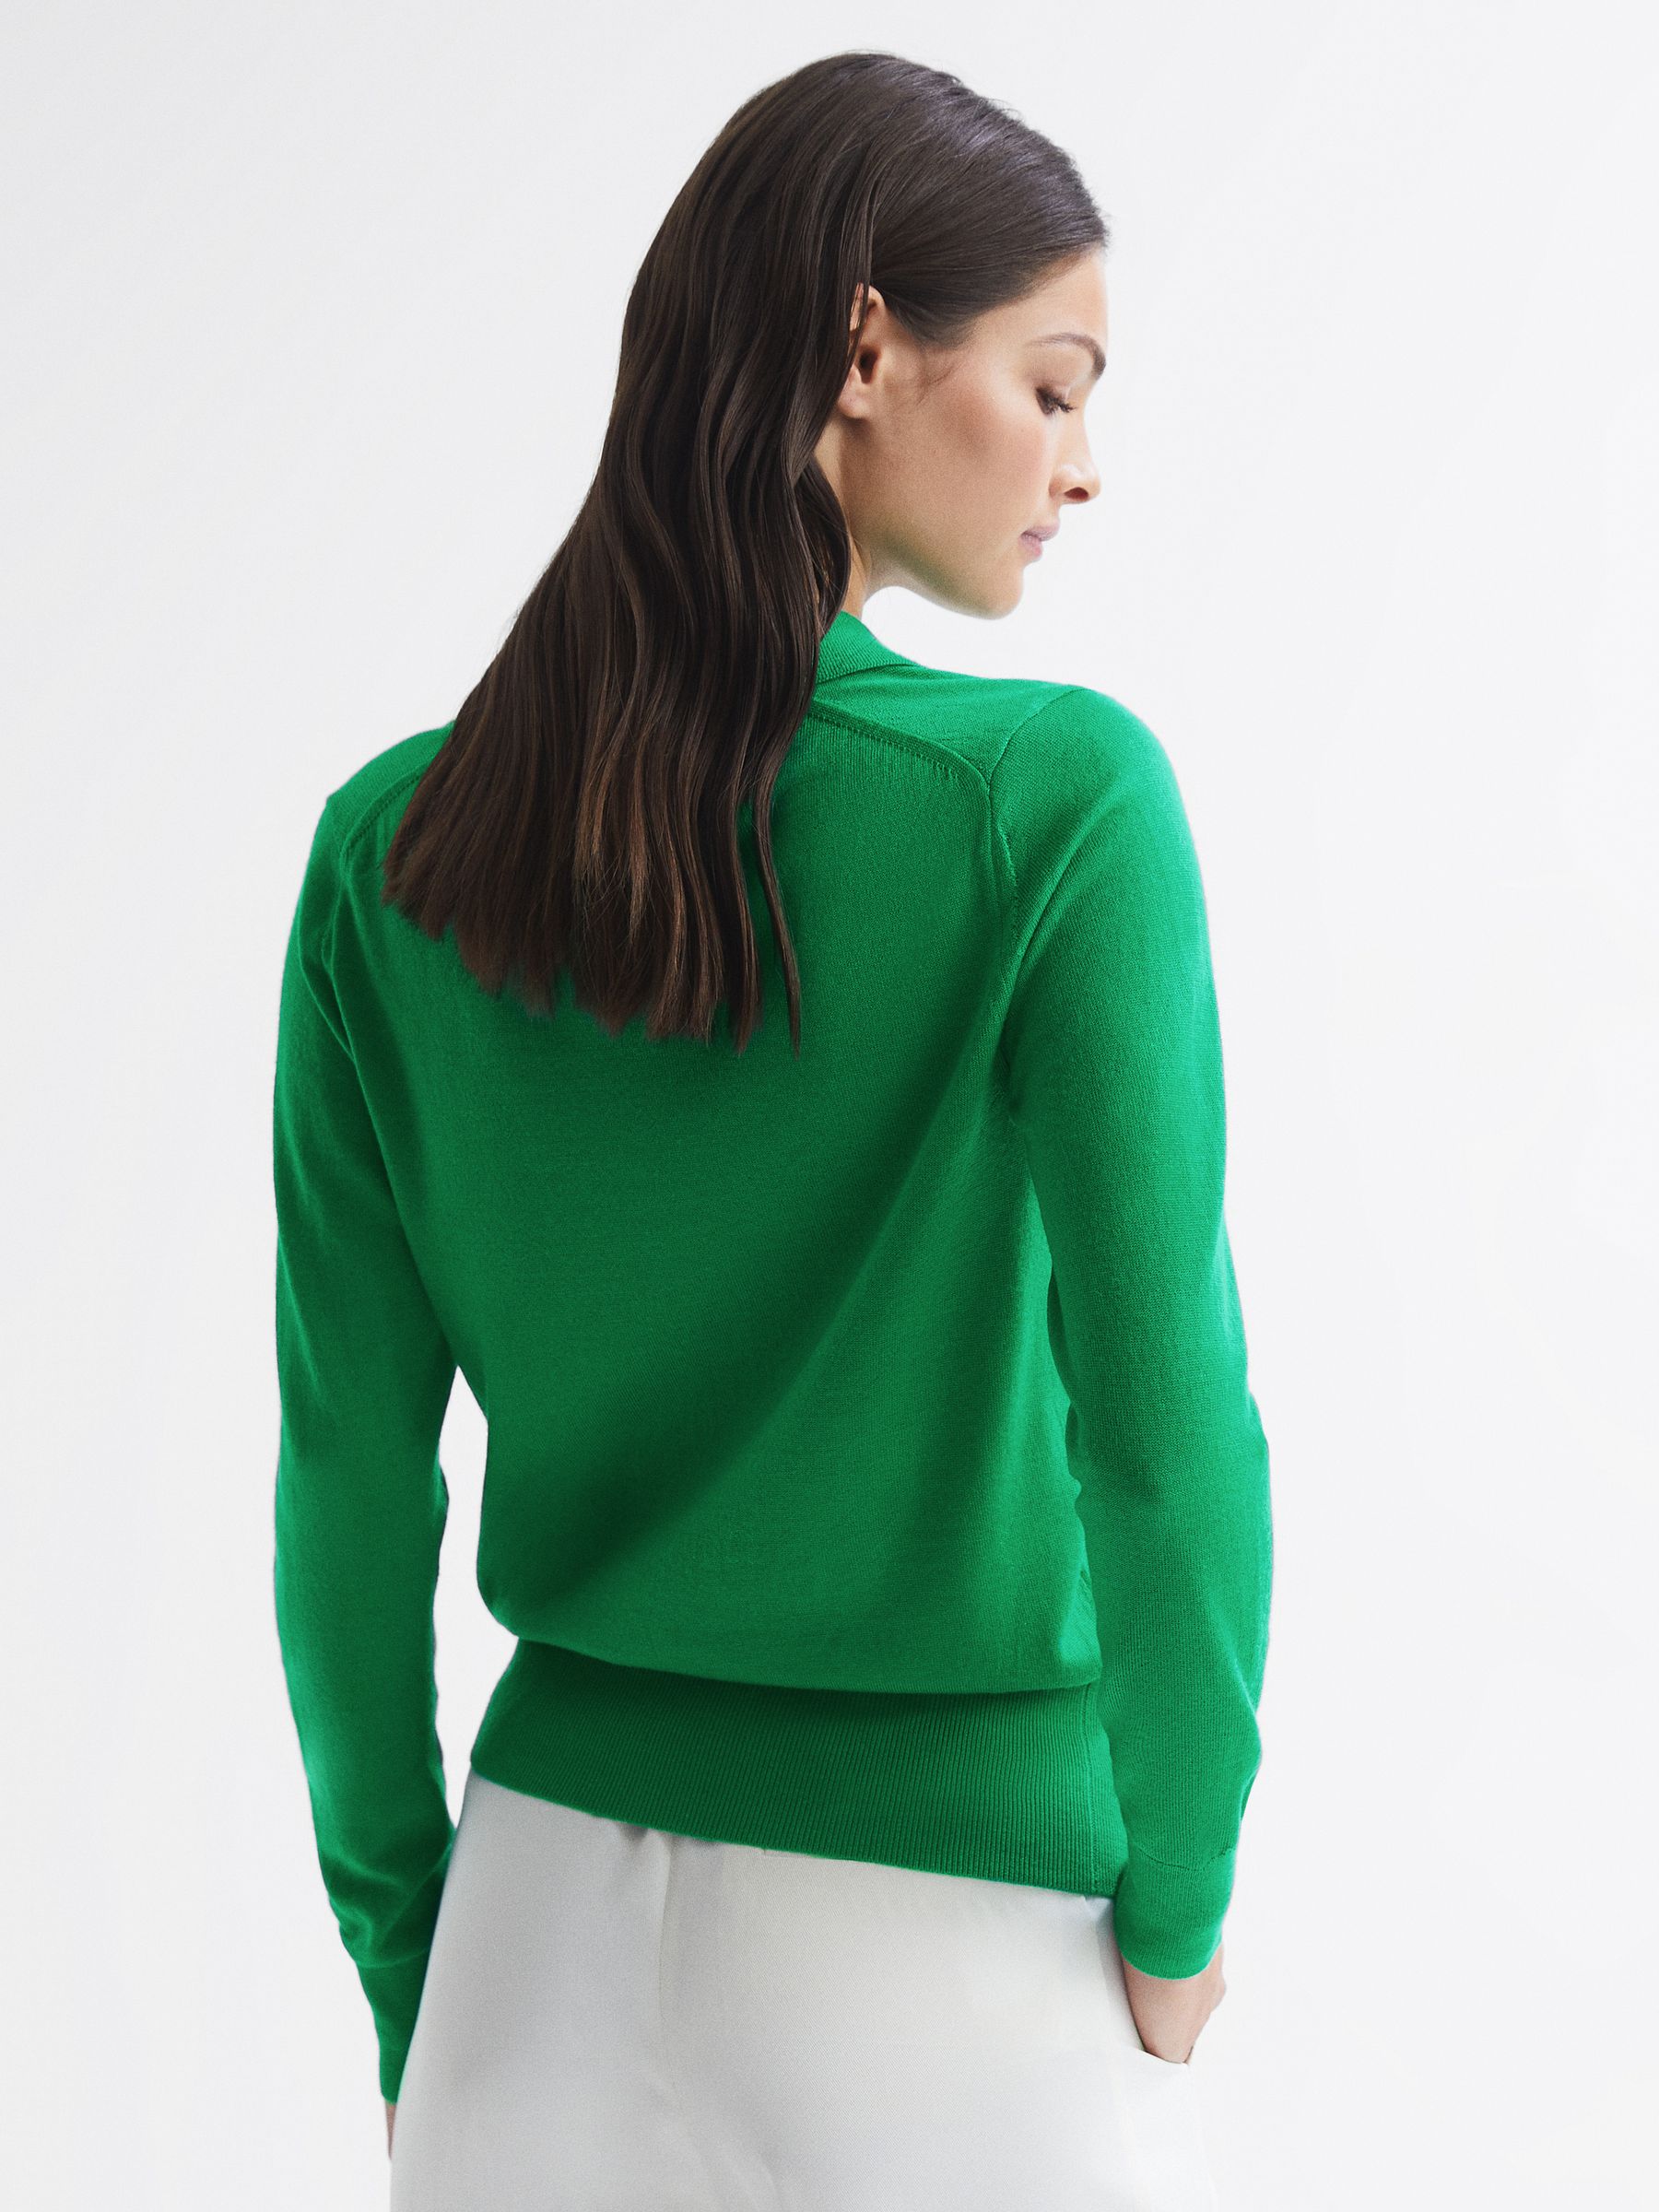 Reiss Candise Collared Knitted Jumper | REISS Australia